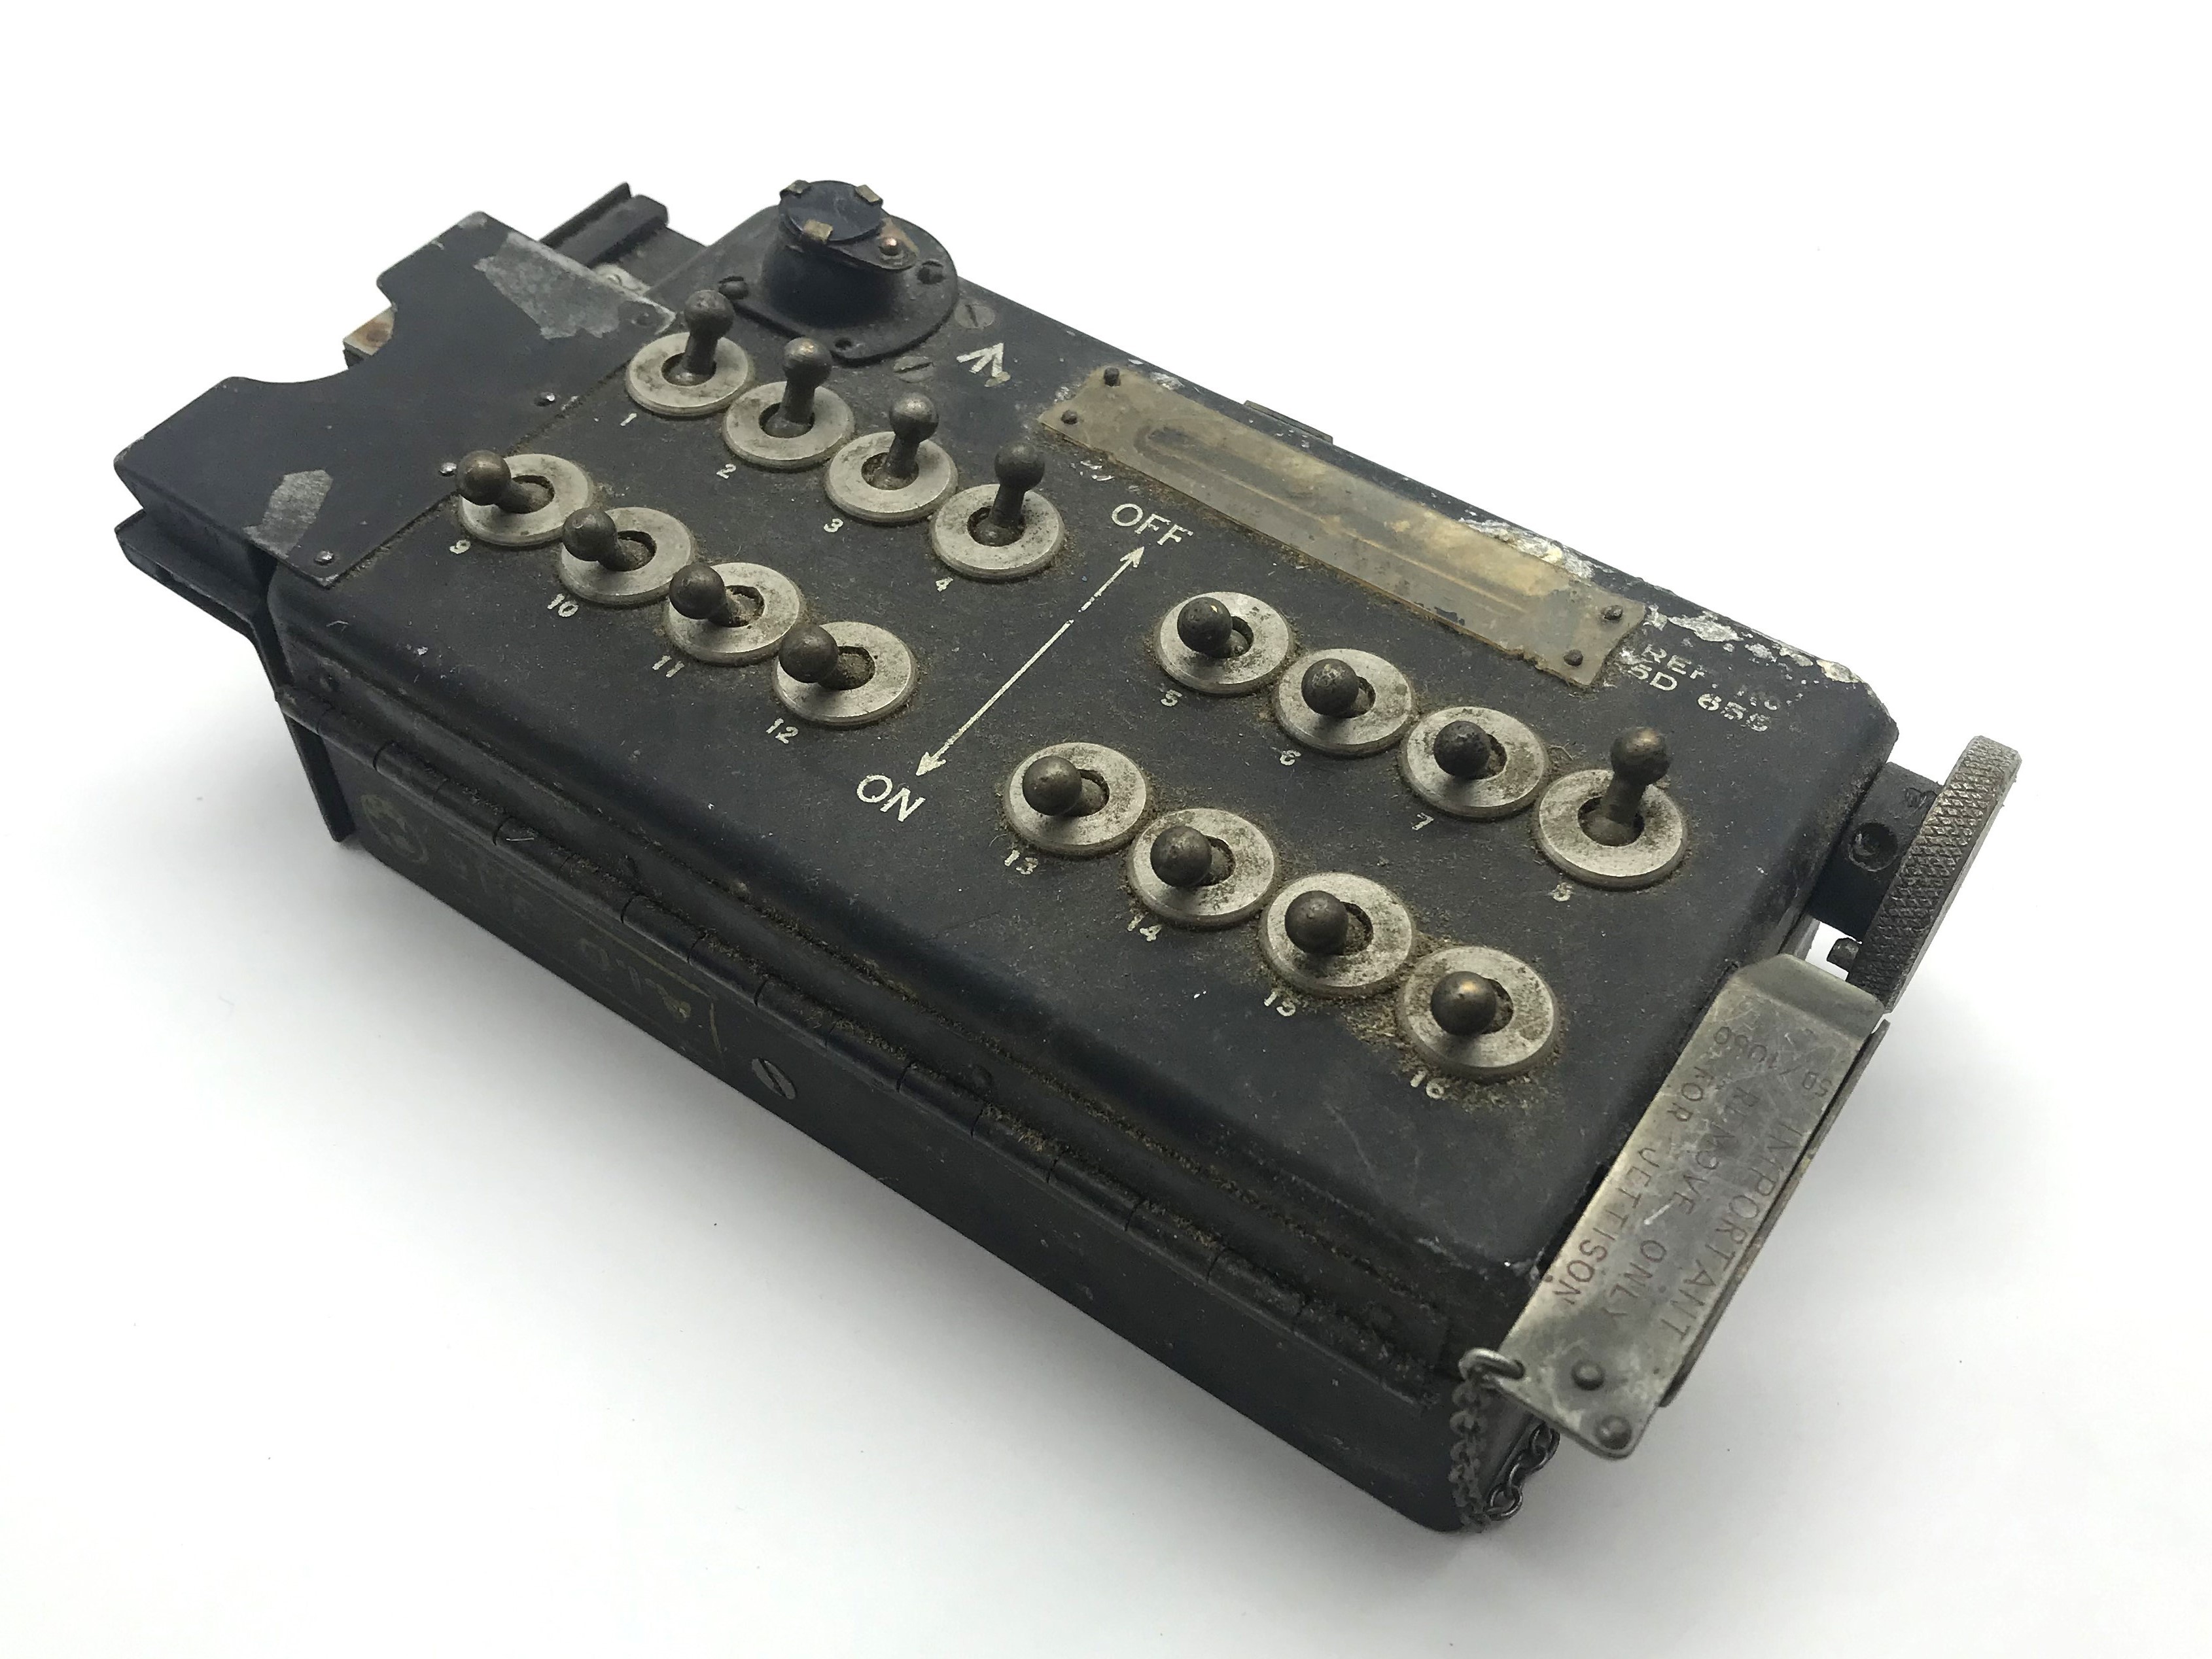 UNUSUAL PART OF THE EARLY GOVERNMENT ISSUED ENGINE BOARD